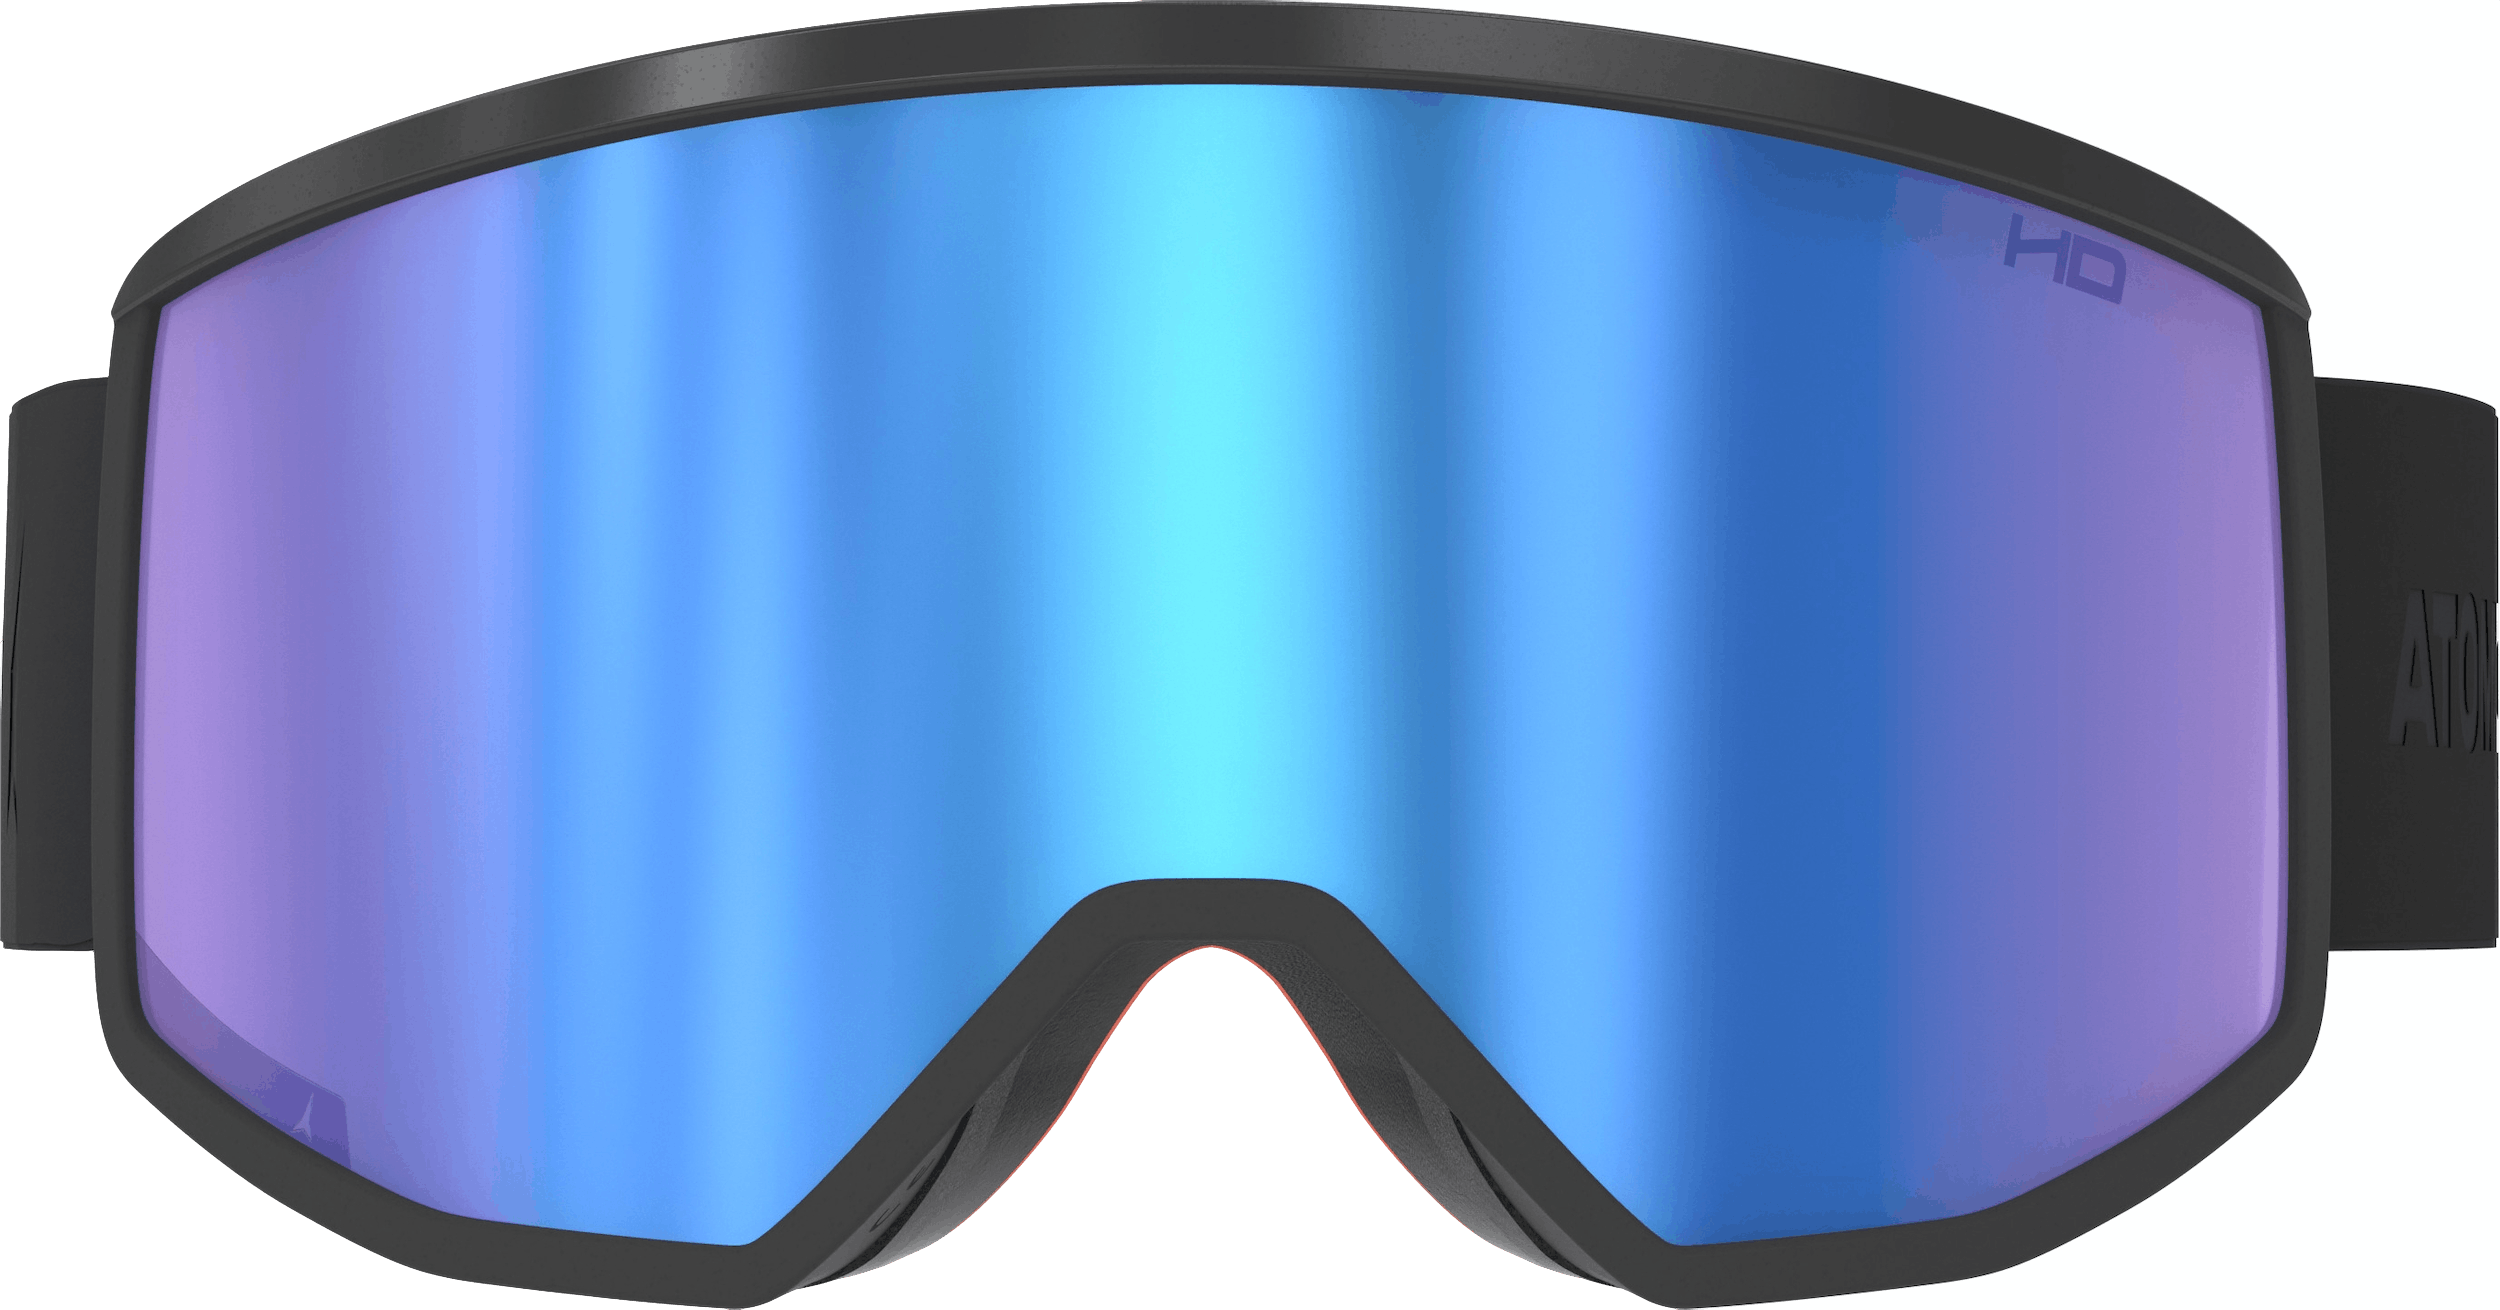 Atomic Four HD Goggles